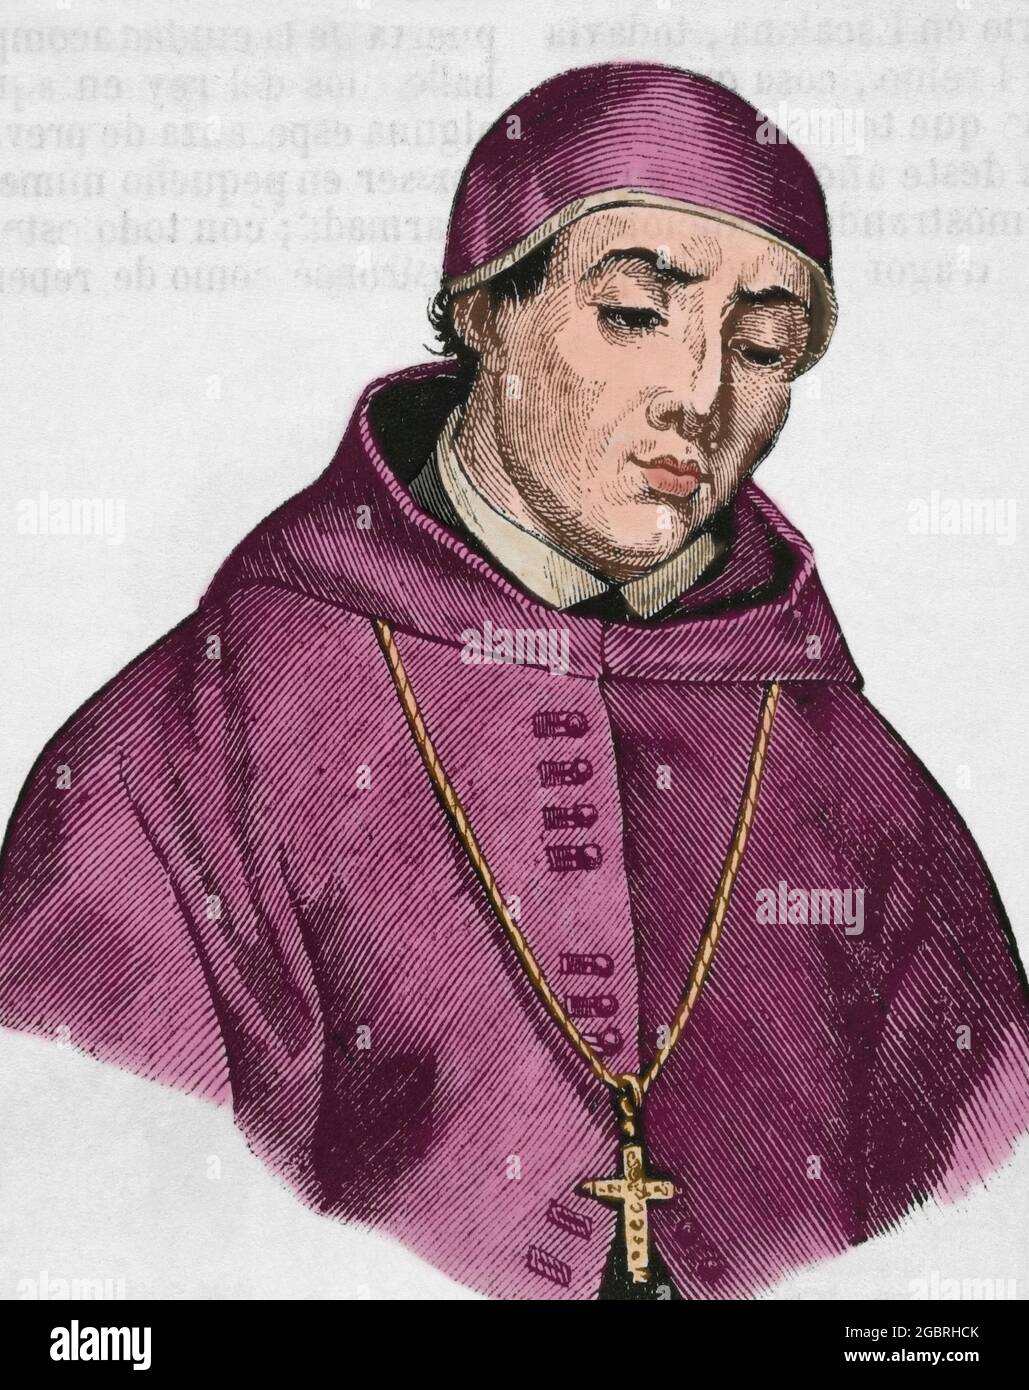 Alonso Fernández de Madrigal, known as Alonso Tostado (1410-1455). Spanish clergyman, academicist and writer. Bishop of Avila 1454-1455. Portrait. Engraving. Later colouration. Historia General de España by Father Mariana. Madrid, 1852. Stock Photo